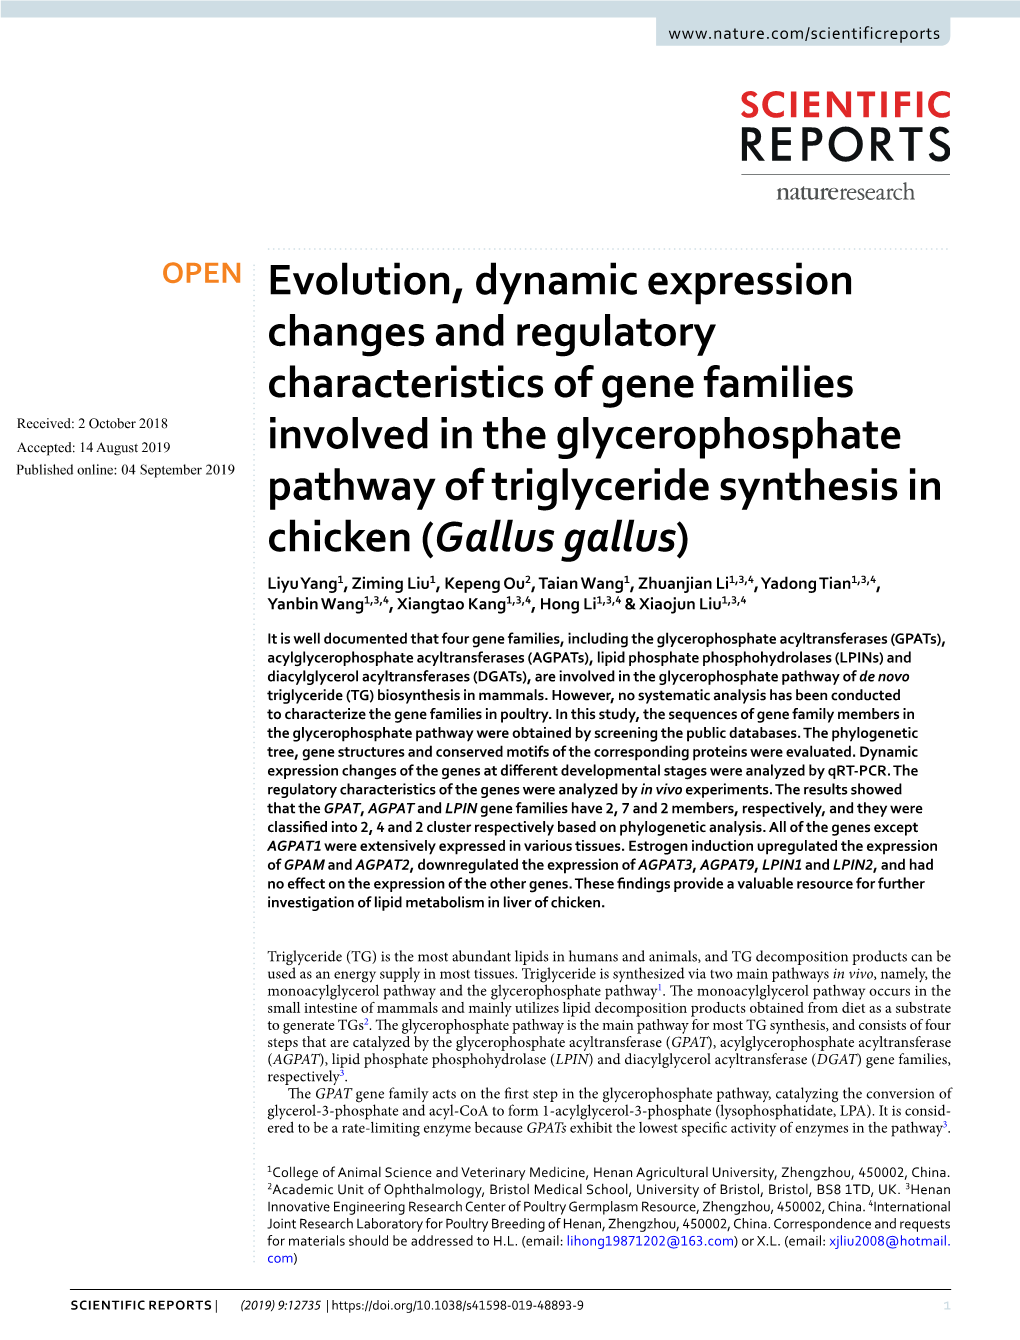 Evolution, Dynamic Expression Changes and Regulatory Characteristics of Gene Families Involved in the Glycerophosphate Pathway O